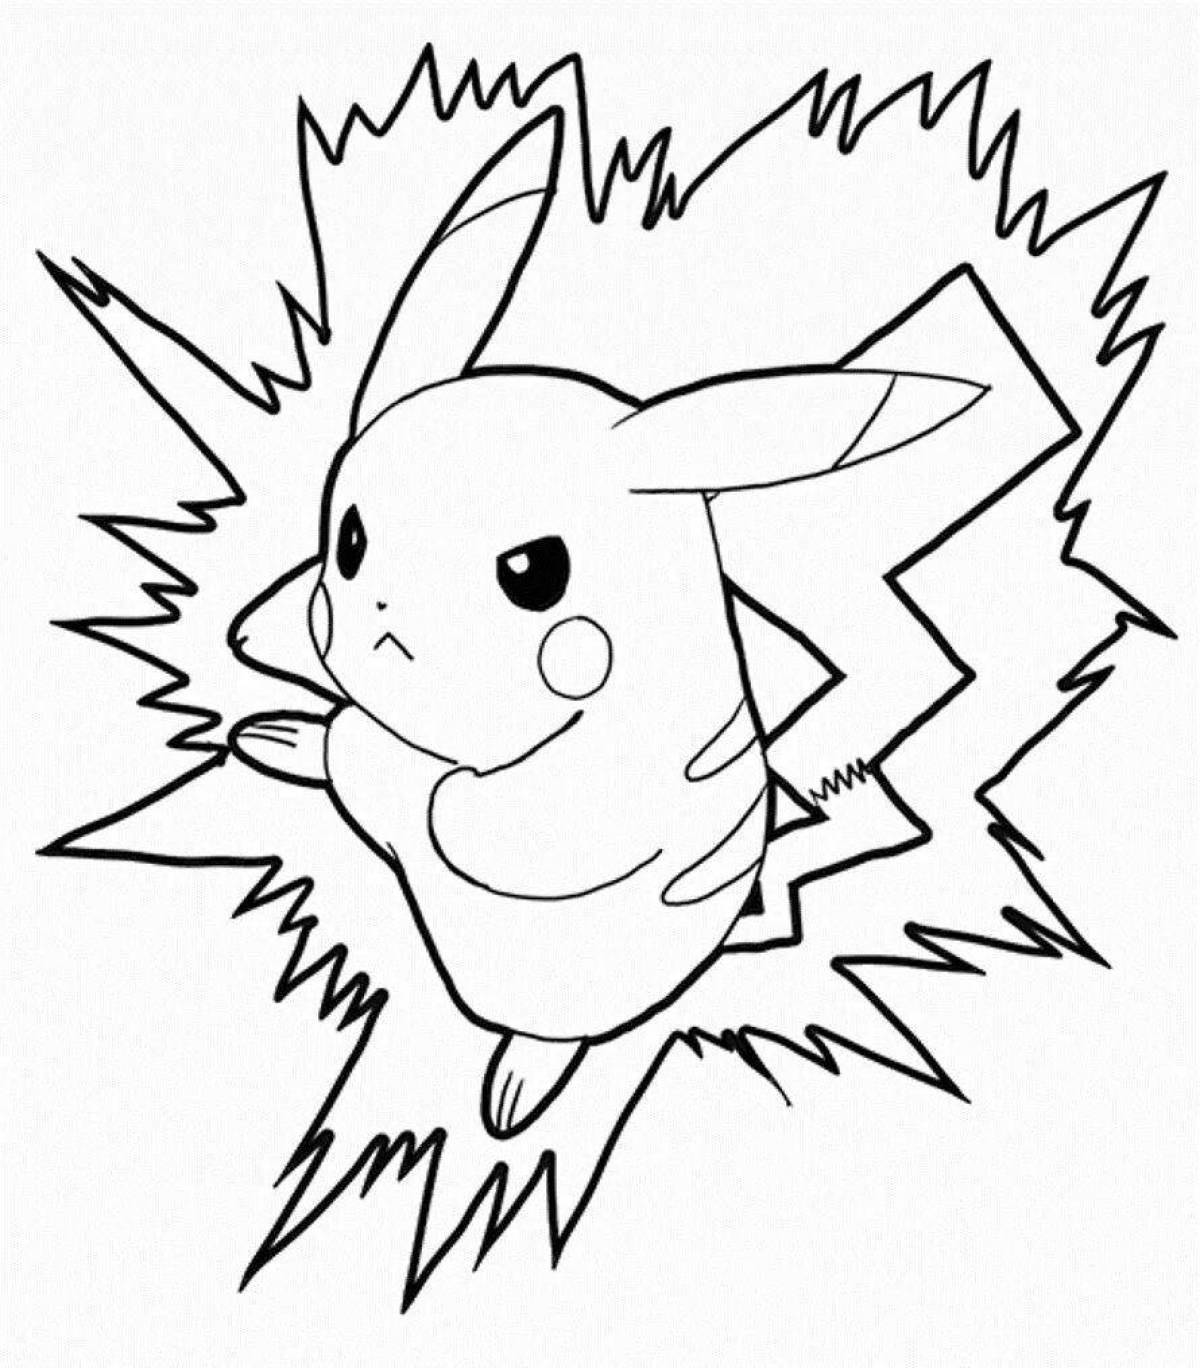 Awesome pikachu seal coloring page